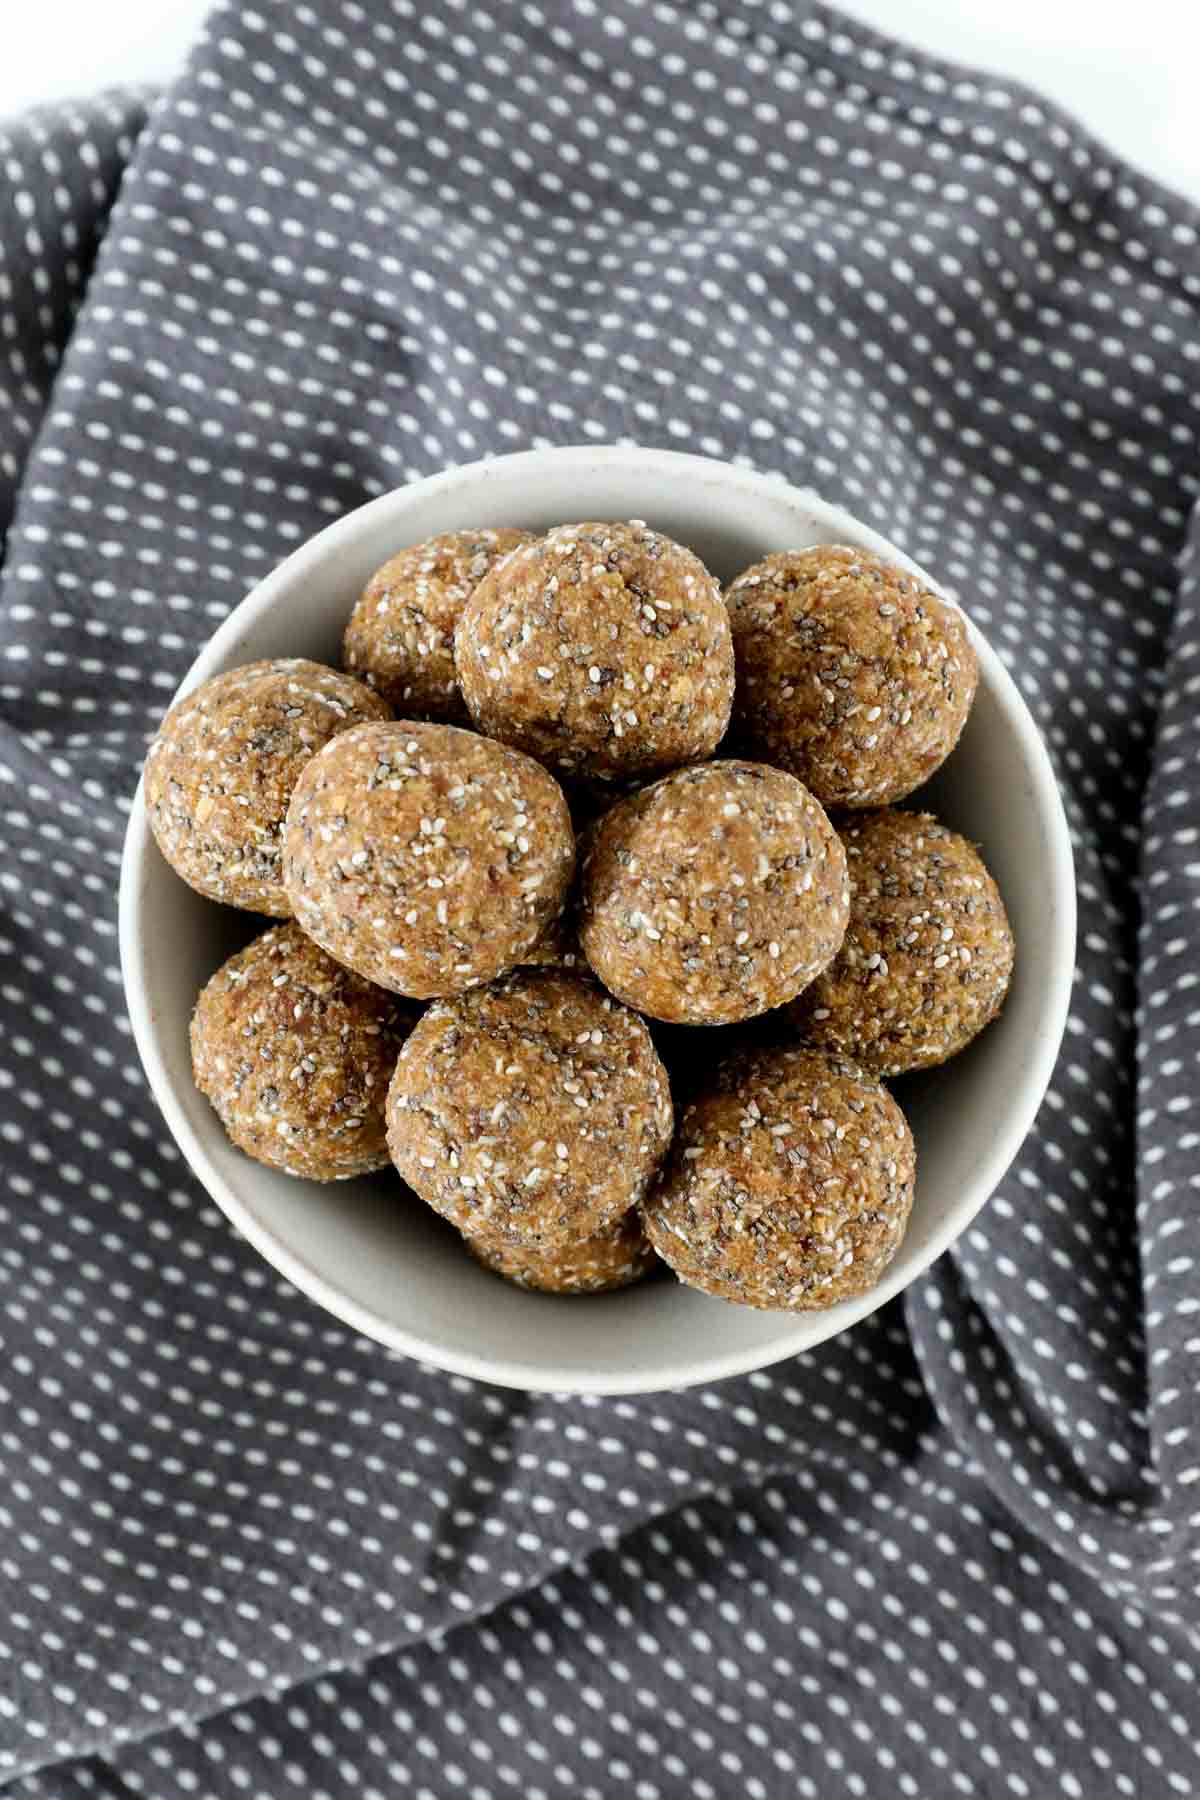 An overhead shot of small round balls made with Weet-Bix and dates.